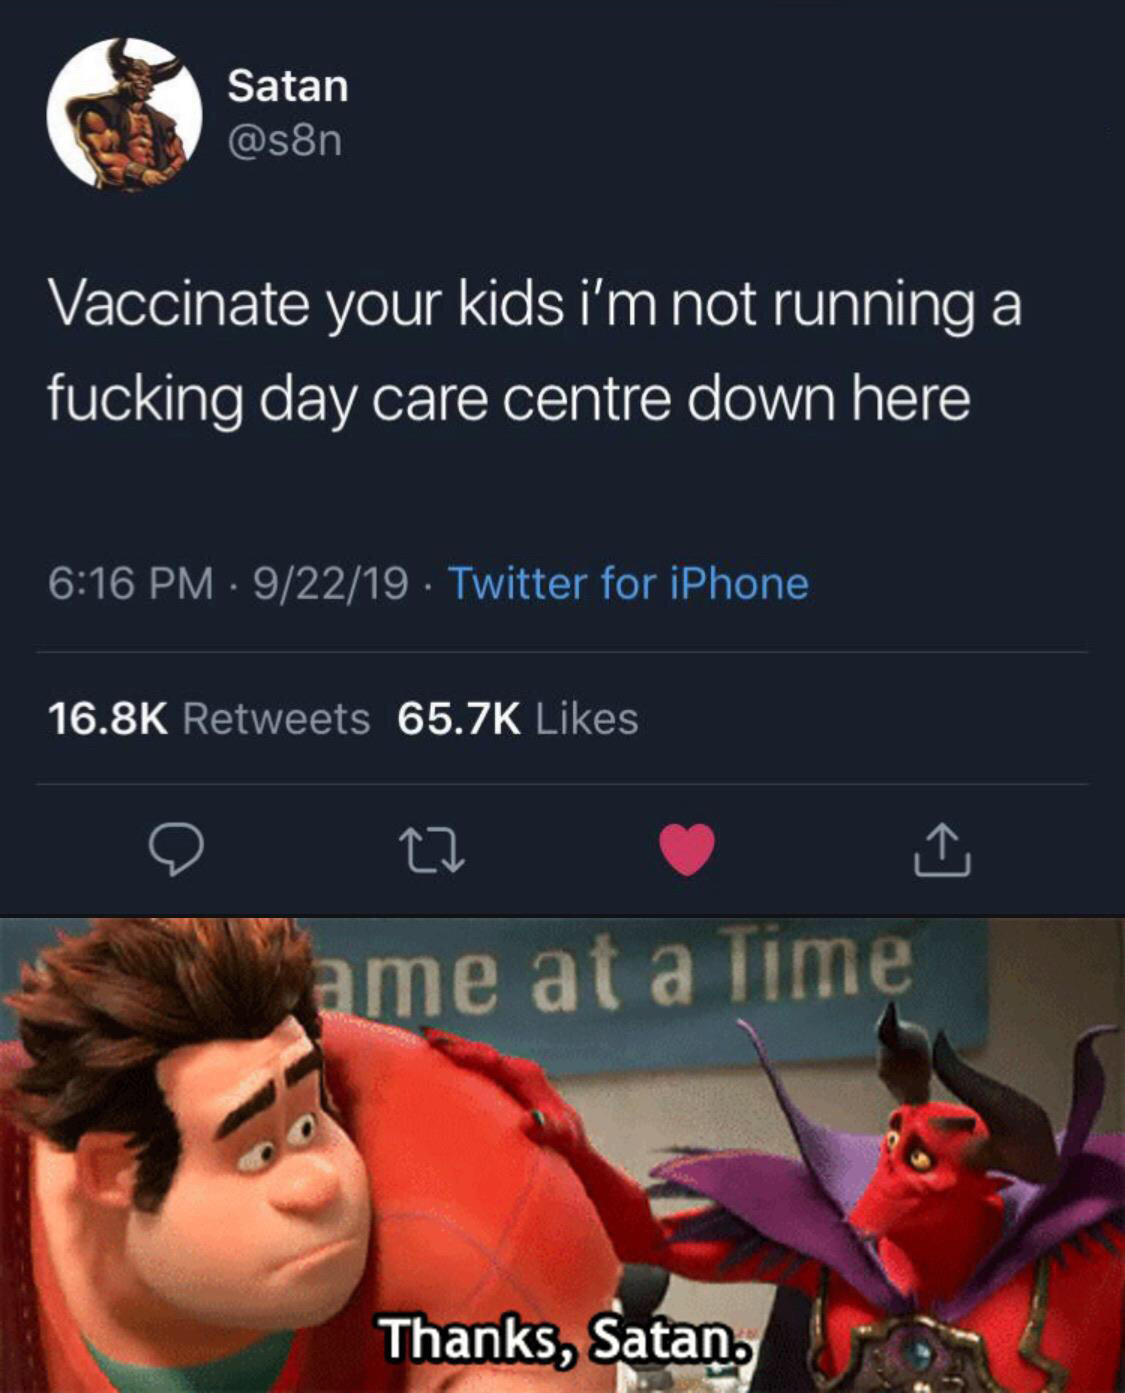 thanks satan gif - Satan Satan Vaccinate your kids i'm not running a fucking day care centre down here 92219 Twitter for iPhone me at a Time Thanks, Satan.